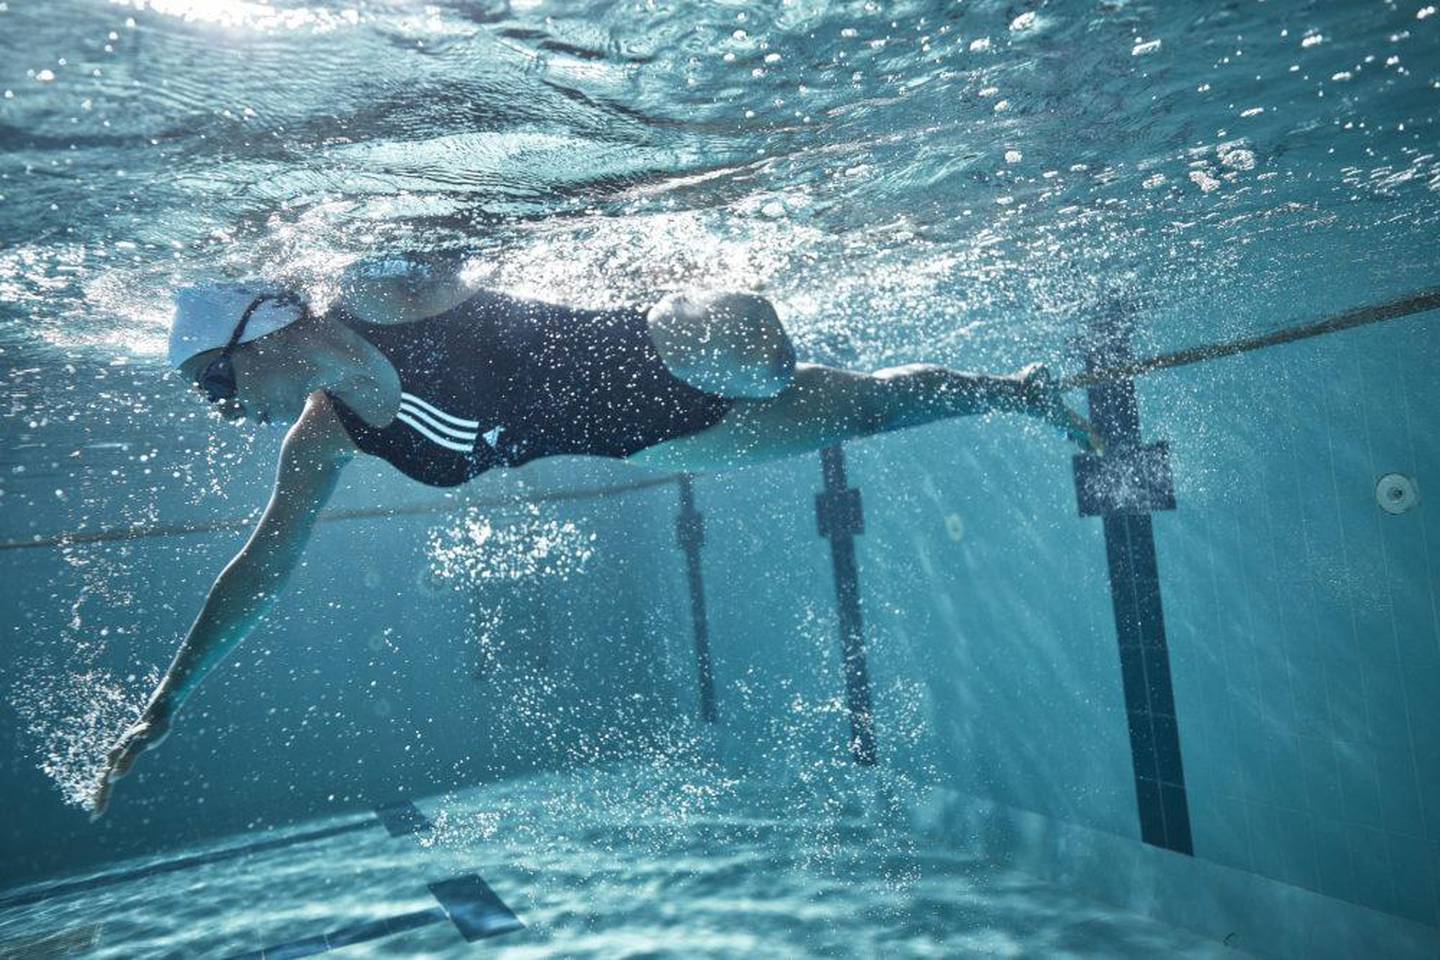 Lebanese amputee athlete Dareen Barbar heads the campaign for the new full-coverage swimwear range by adidas.